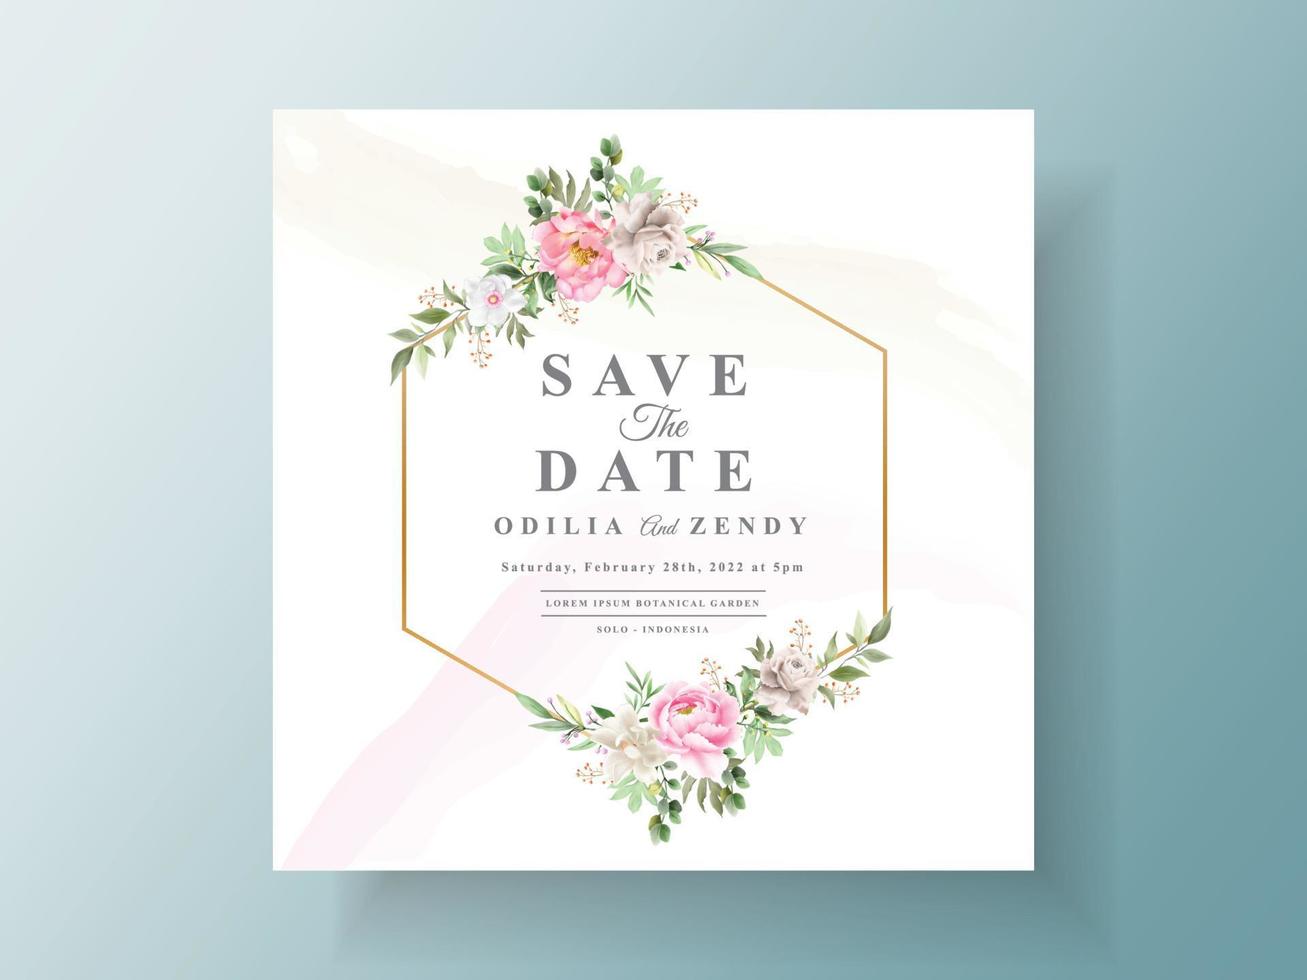 Elegant flower and leaves watercolor wedding invitation template vector